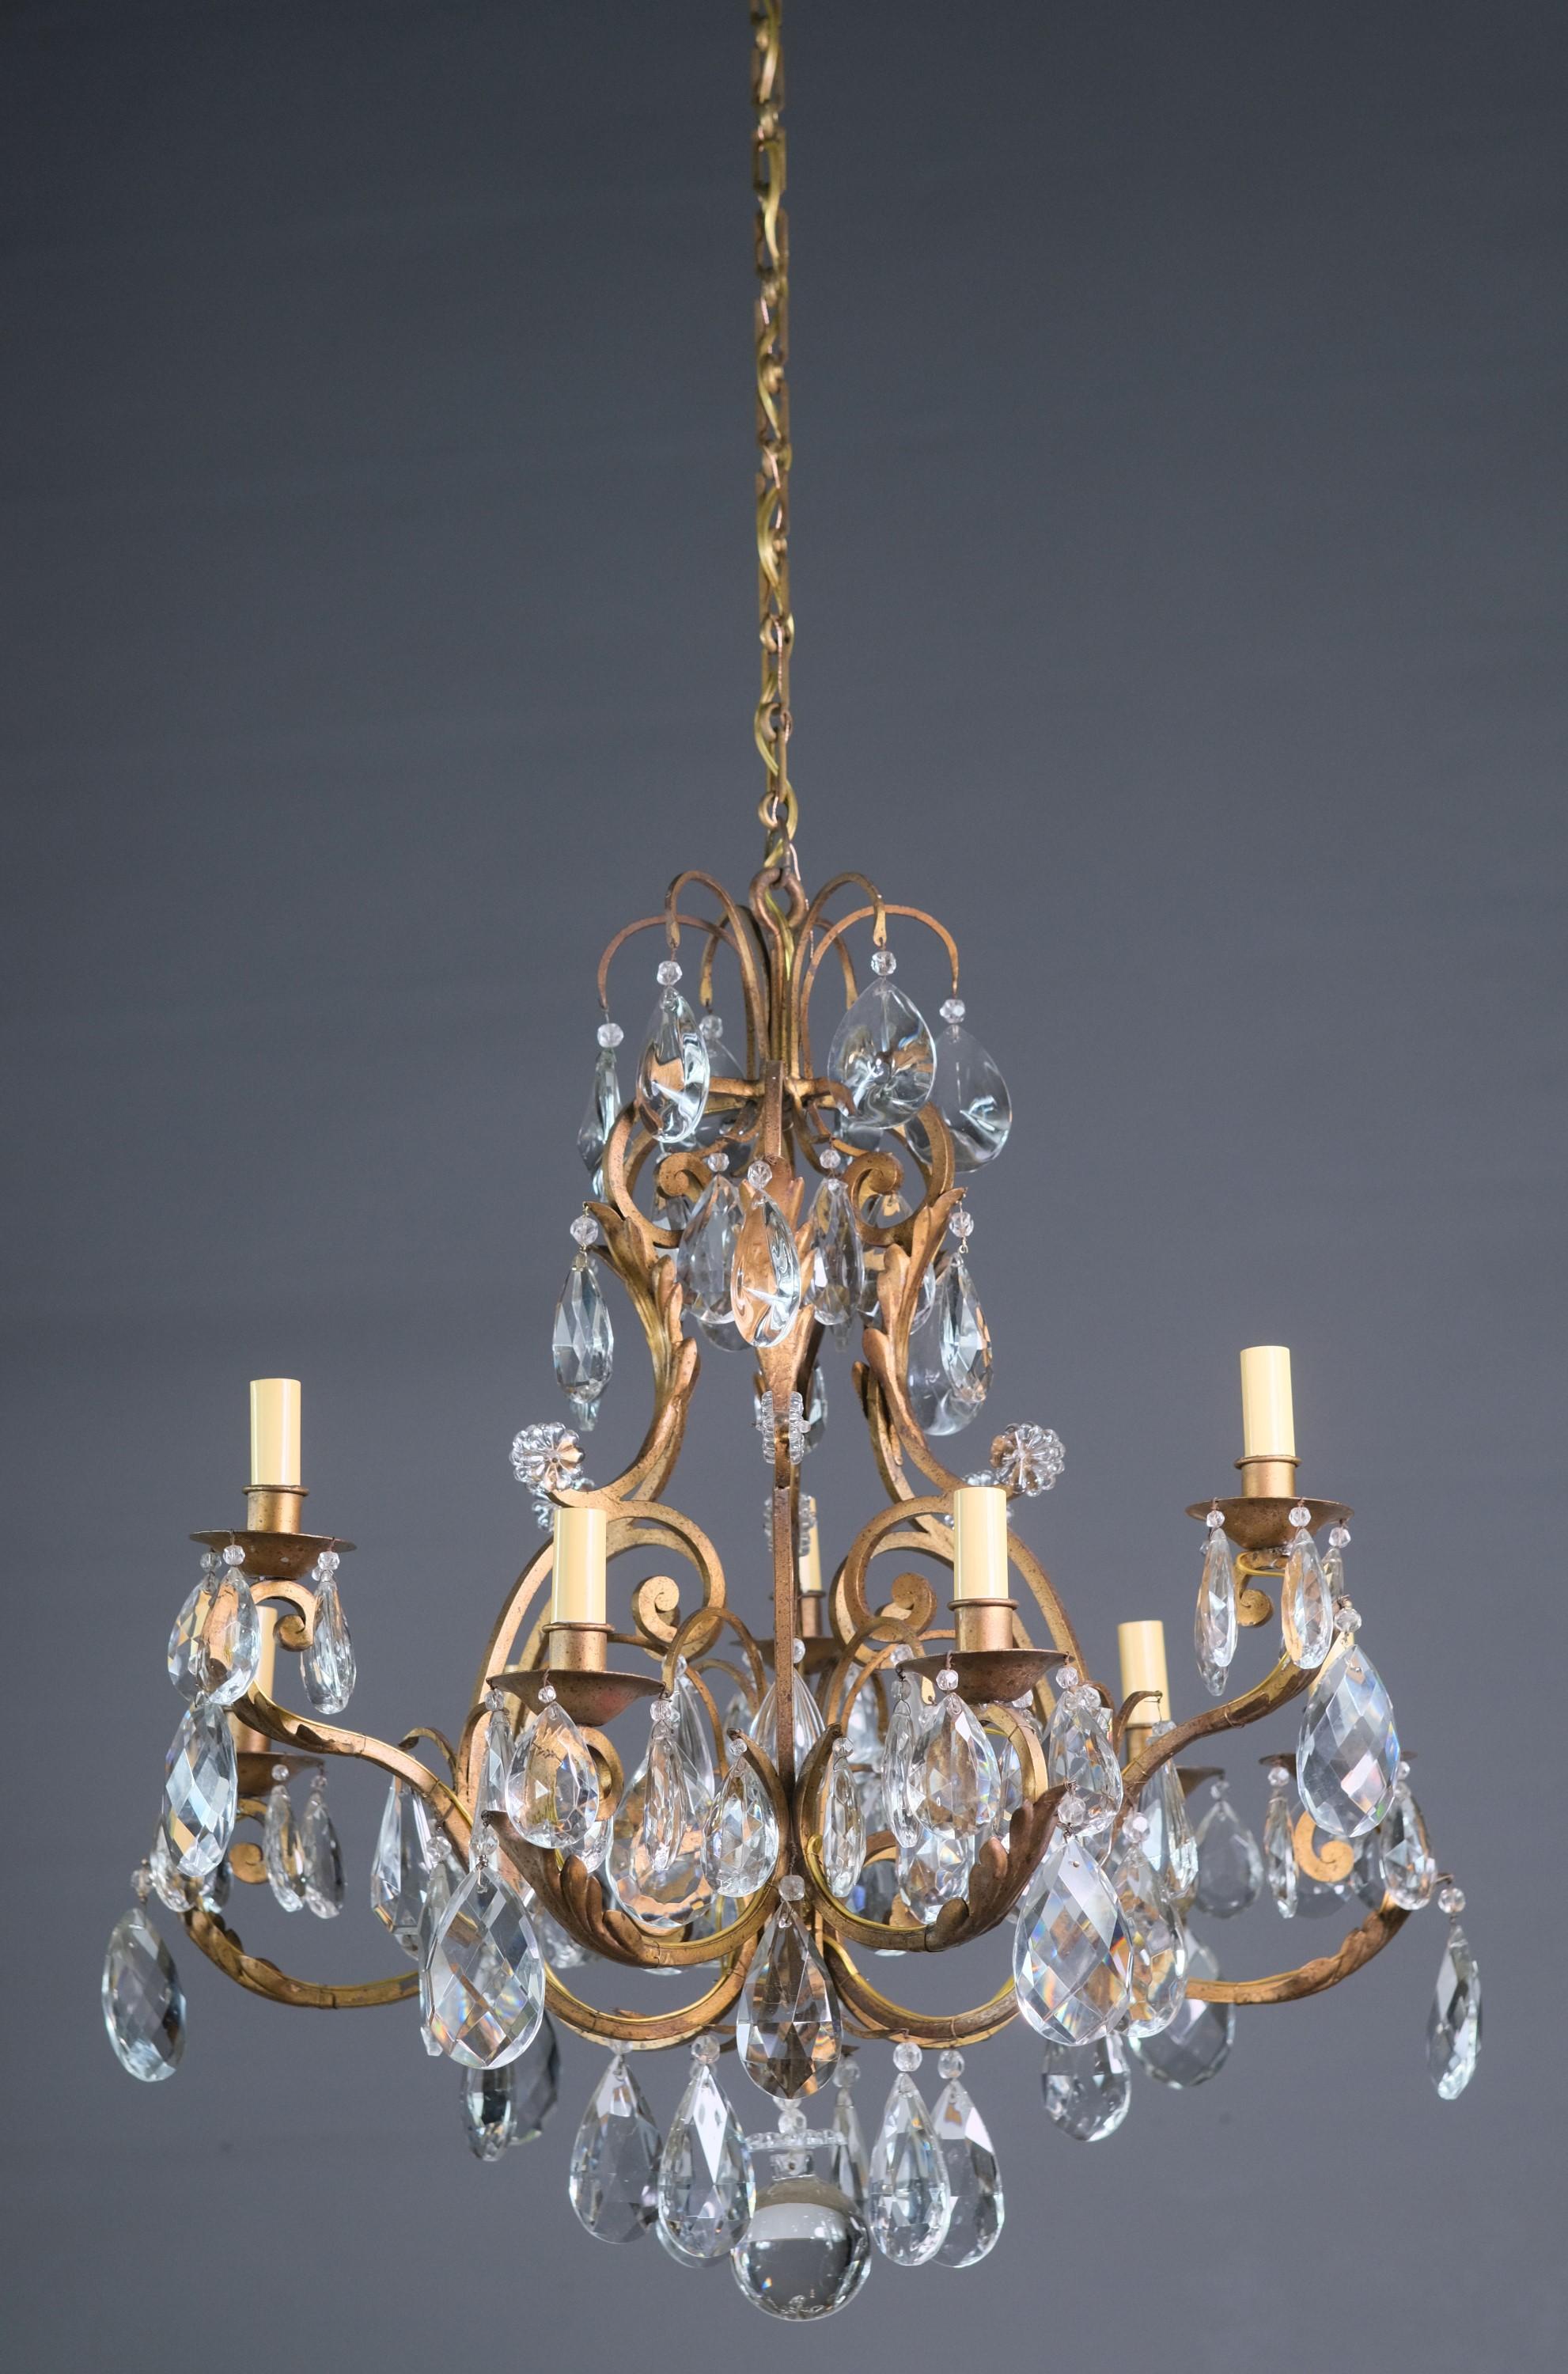 20th century French chandelier that has been cleaned and restored. Wrought iron with nine lights. Beautiful crystals drip everywhere. Please note, this item is located in one of our NYC locations.